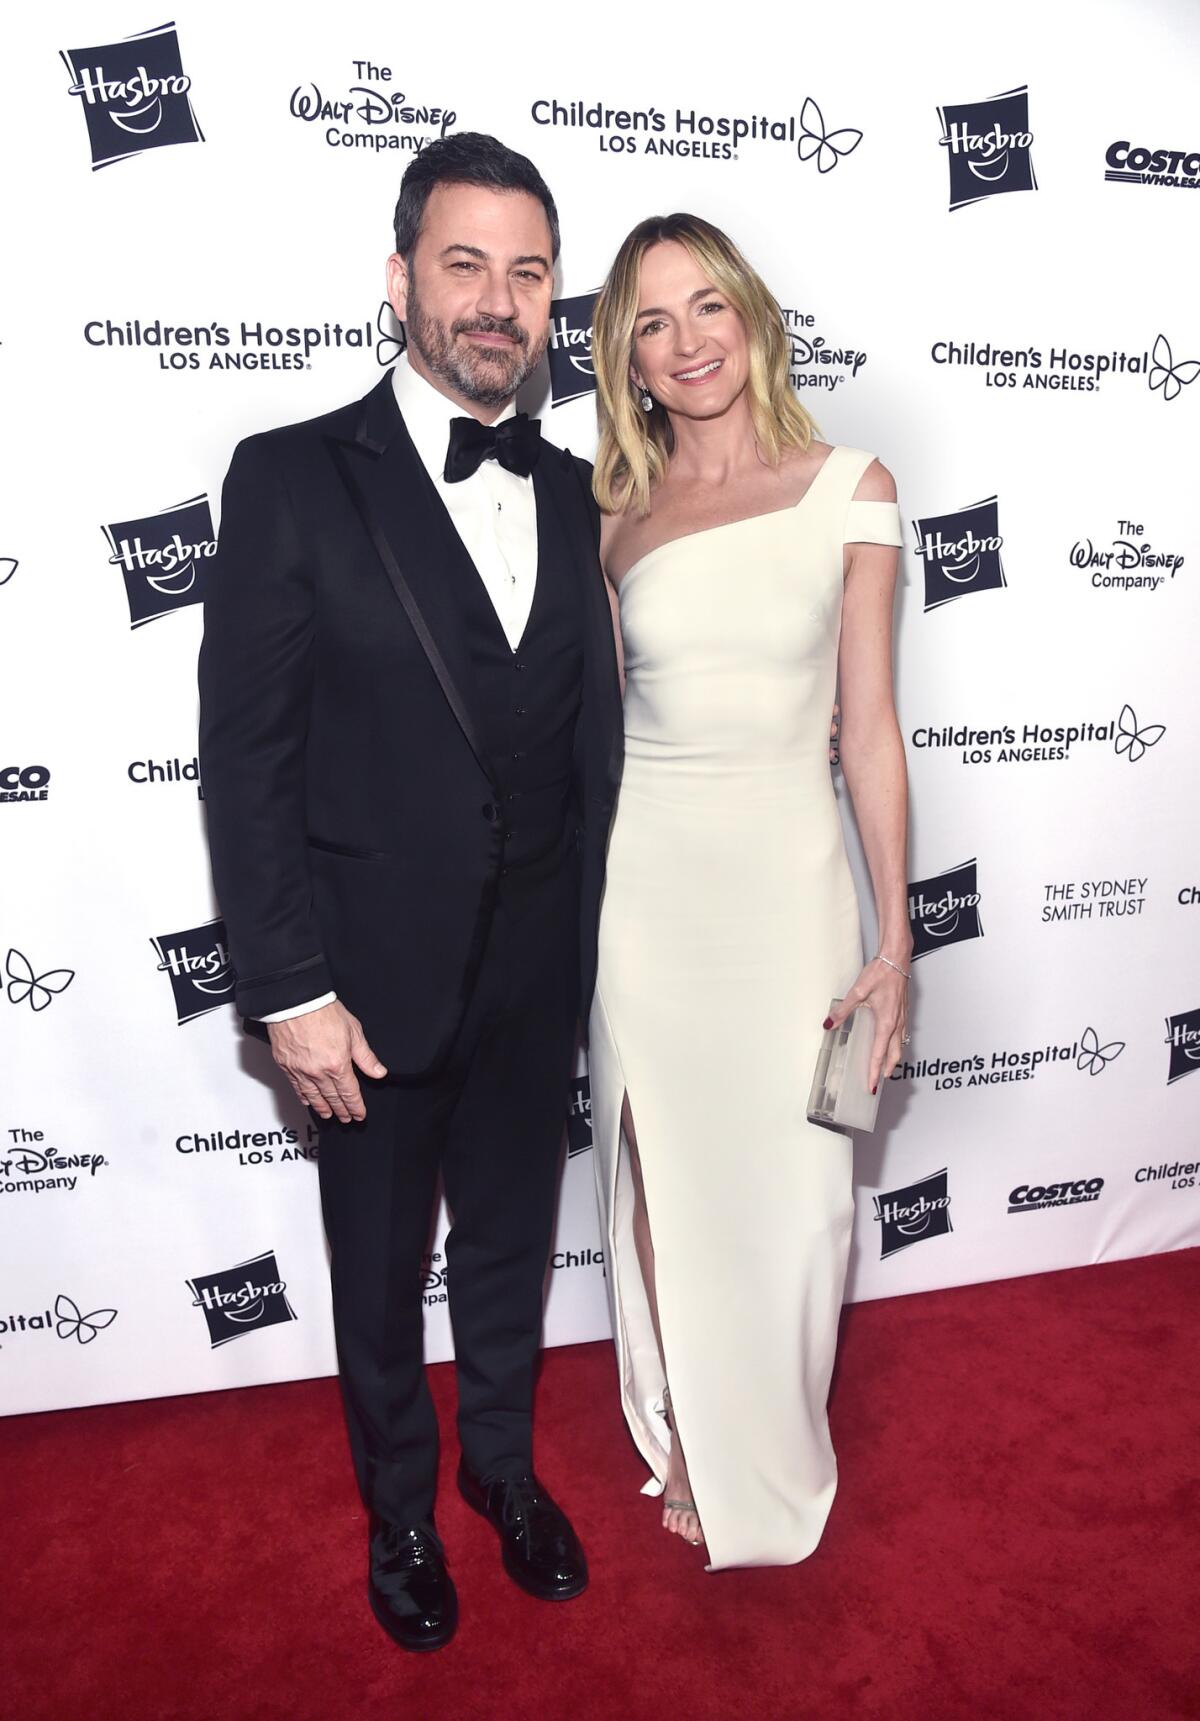 Courage to Care Award recipient Jimmy Kimmel and his wife, Molly McNearney, at the Children's Hospital Los Angeles gala.